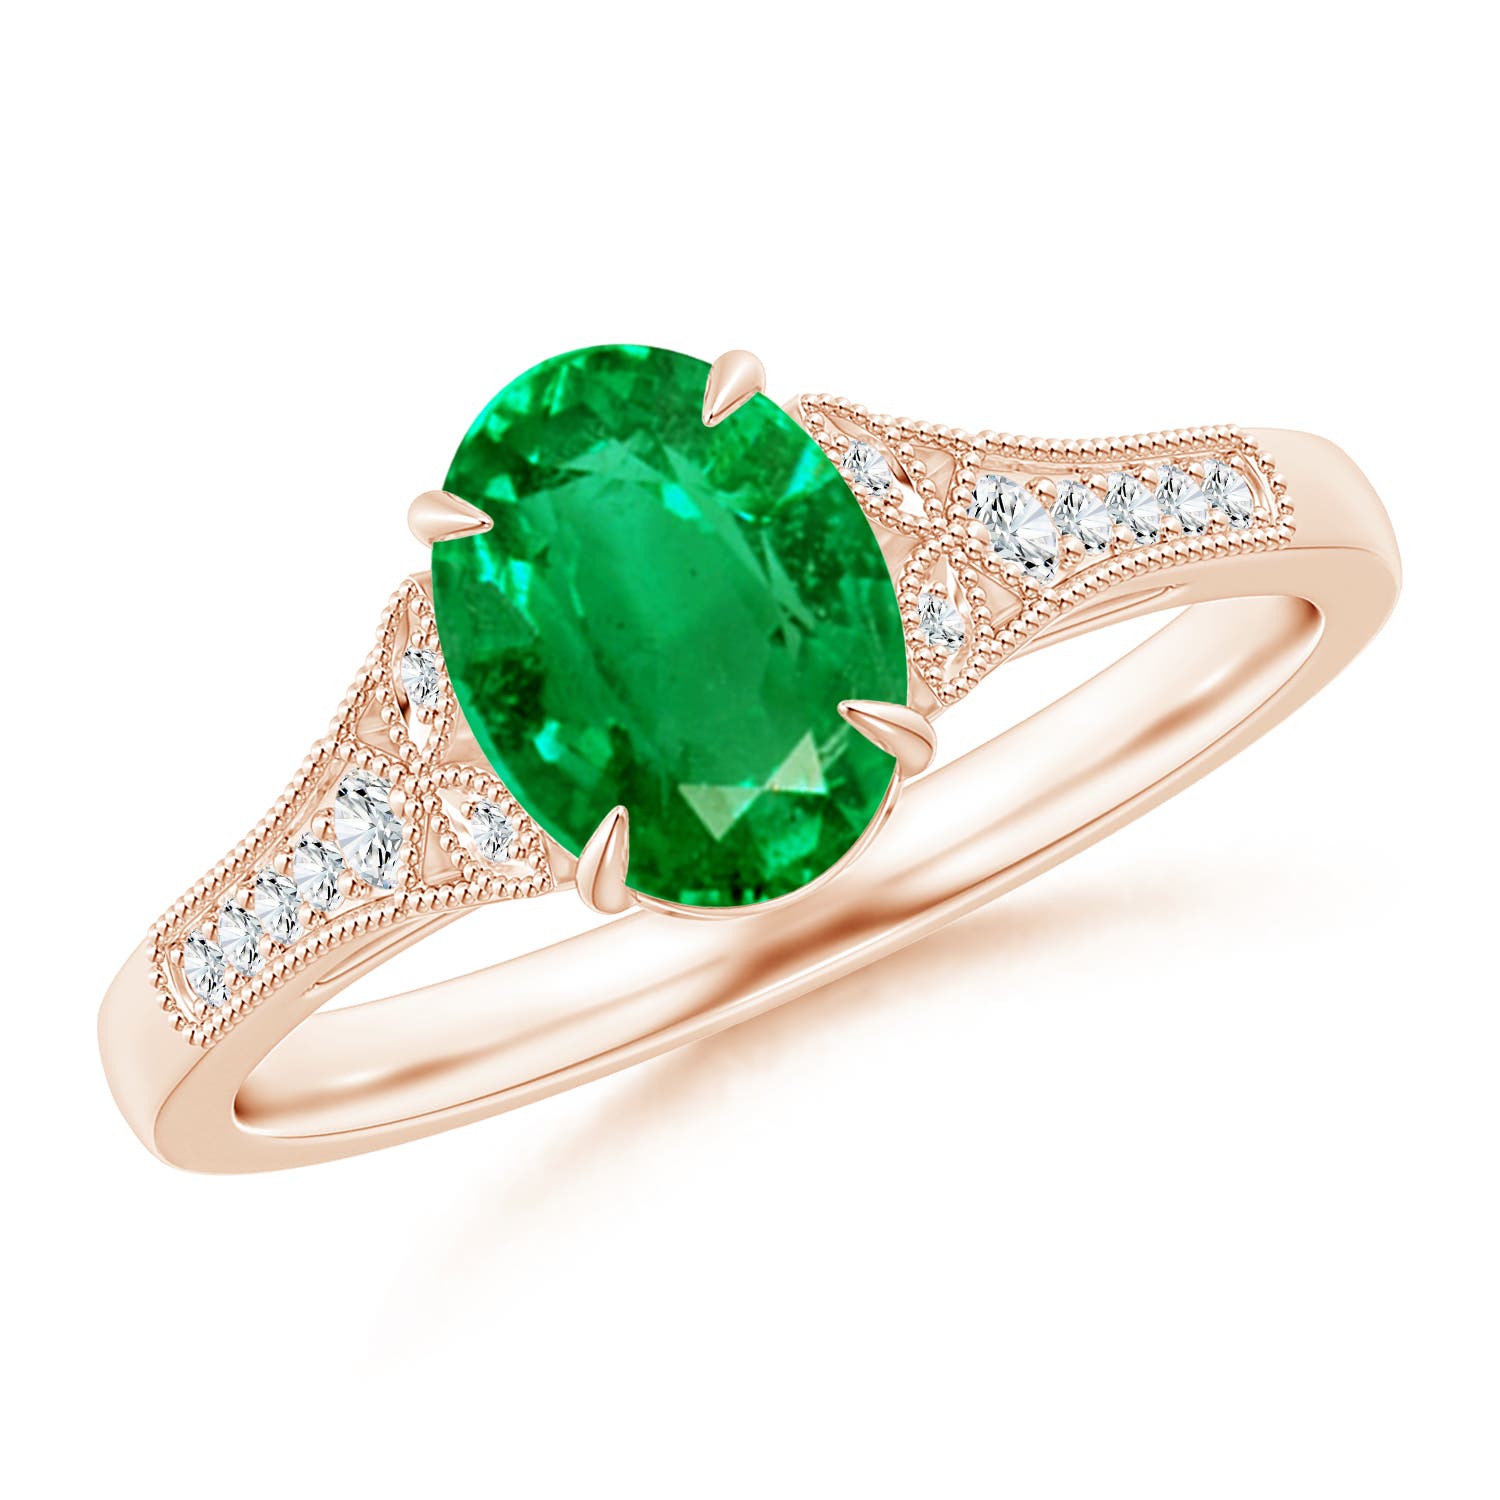 AAA - Emerald / 1.24 CT / 14 KT Rose Gold